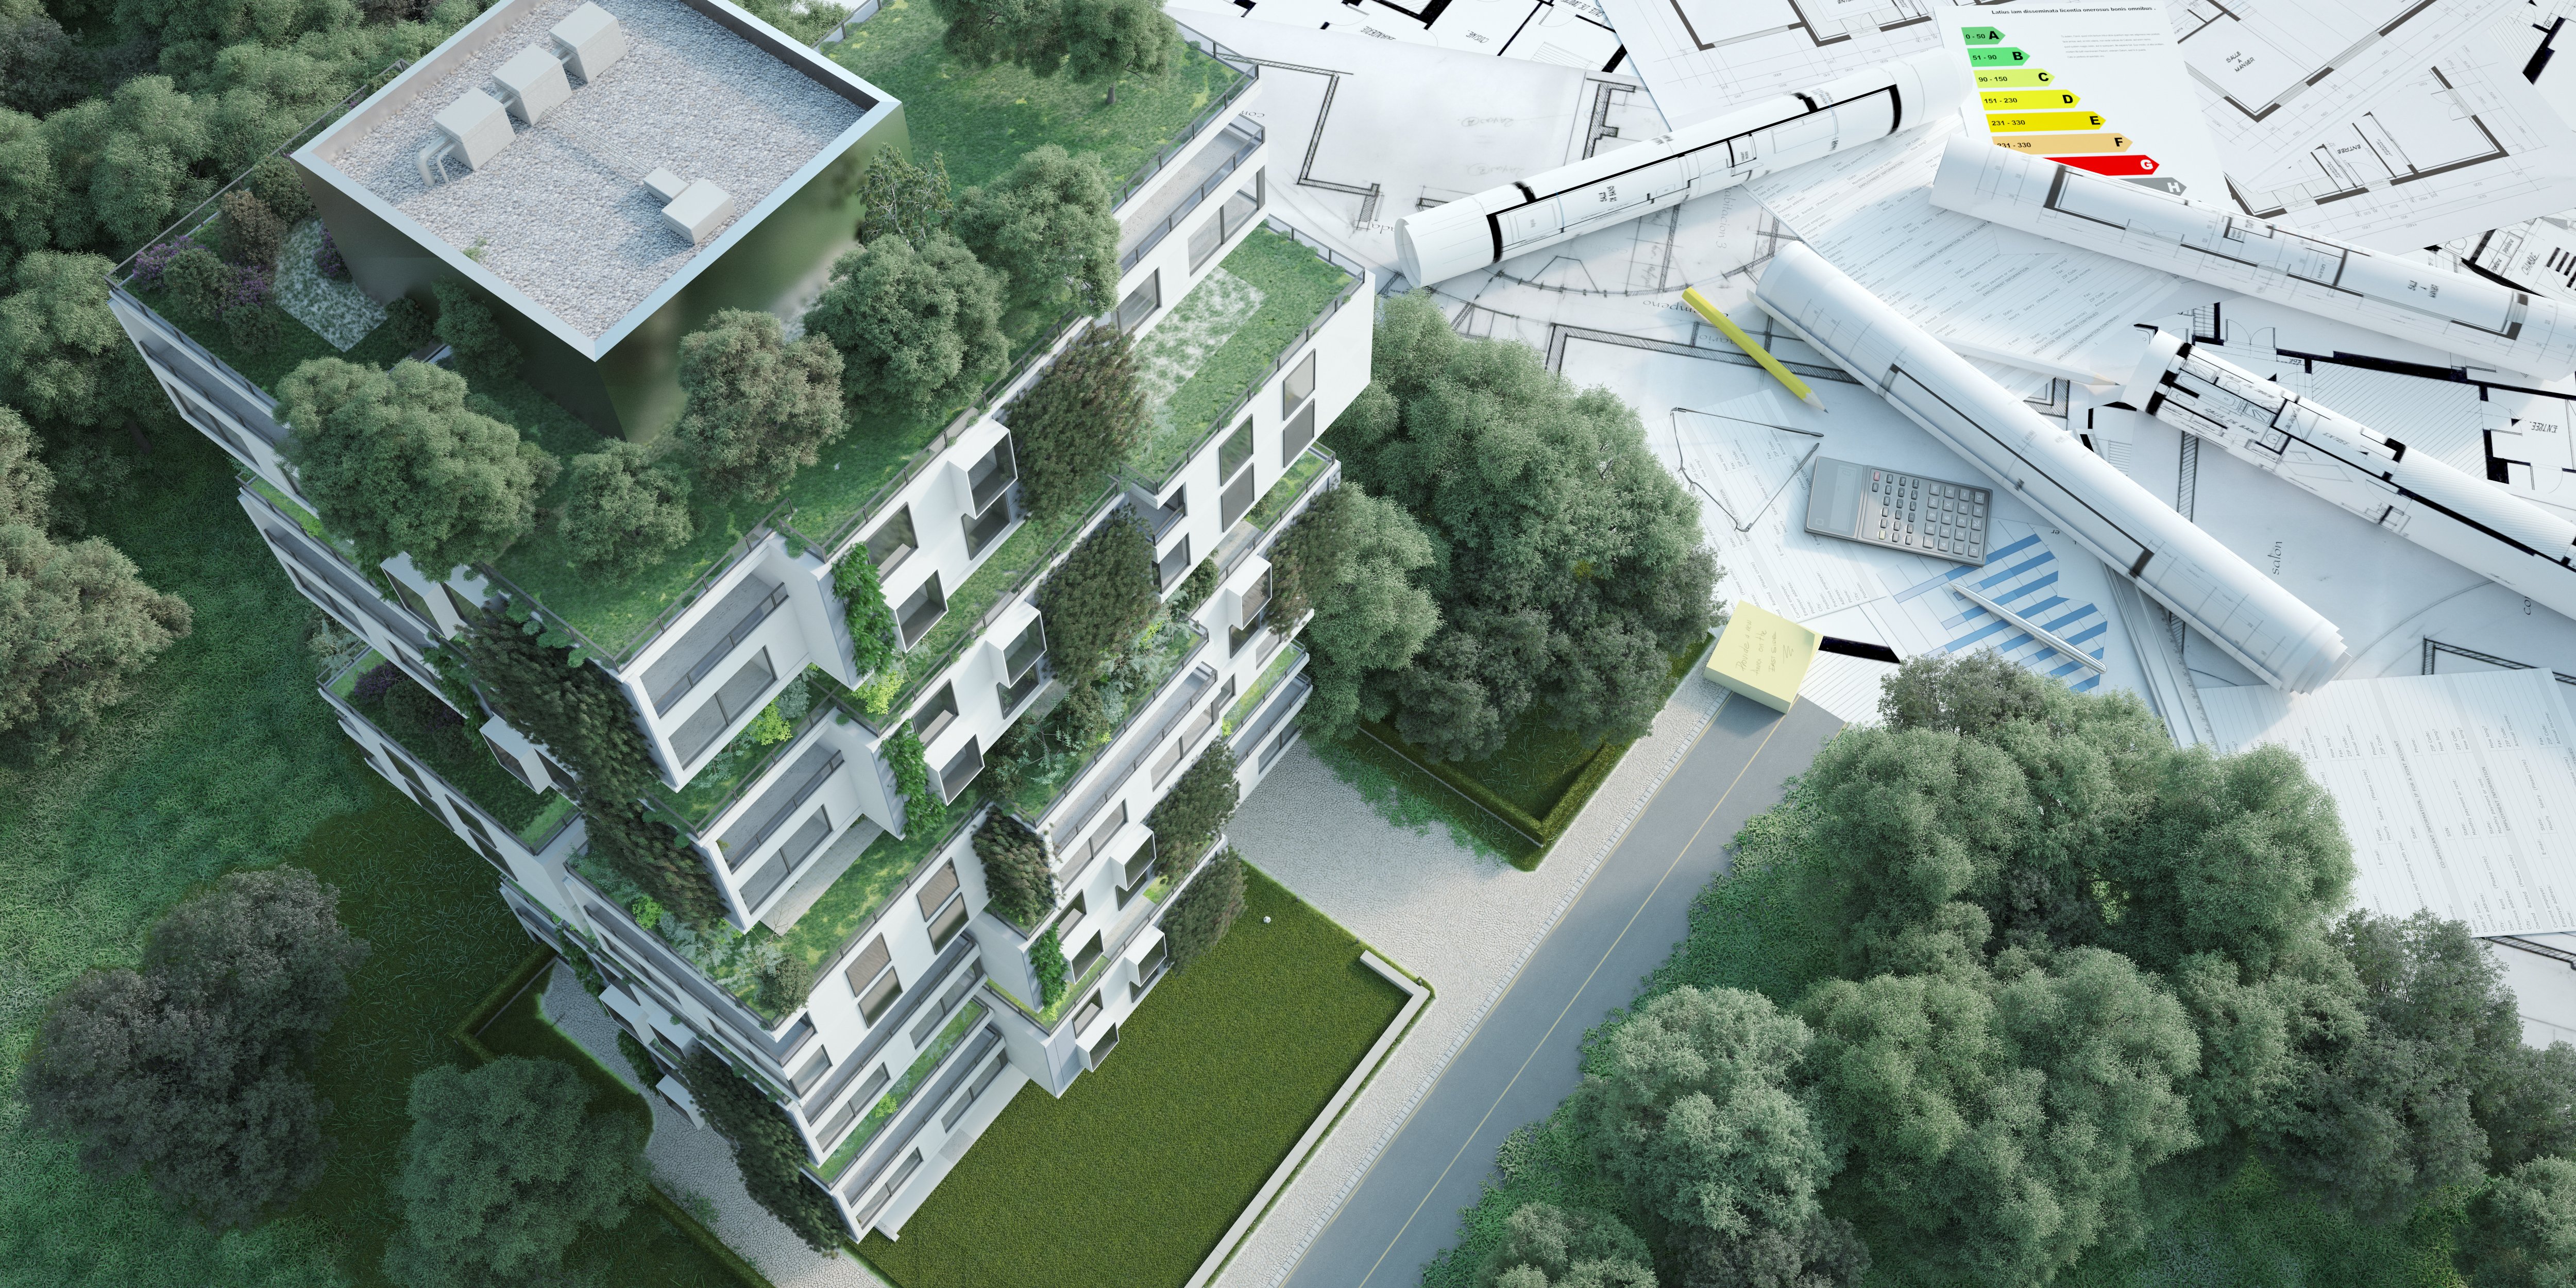 3D rendering of a sustainable model apartment building with blueprints